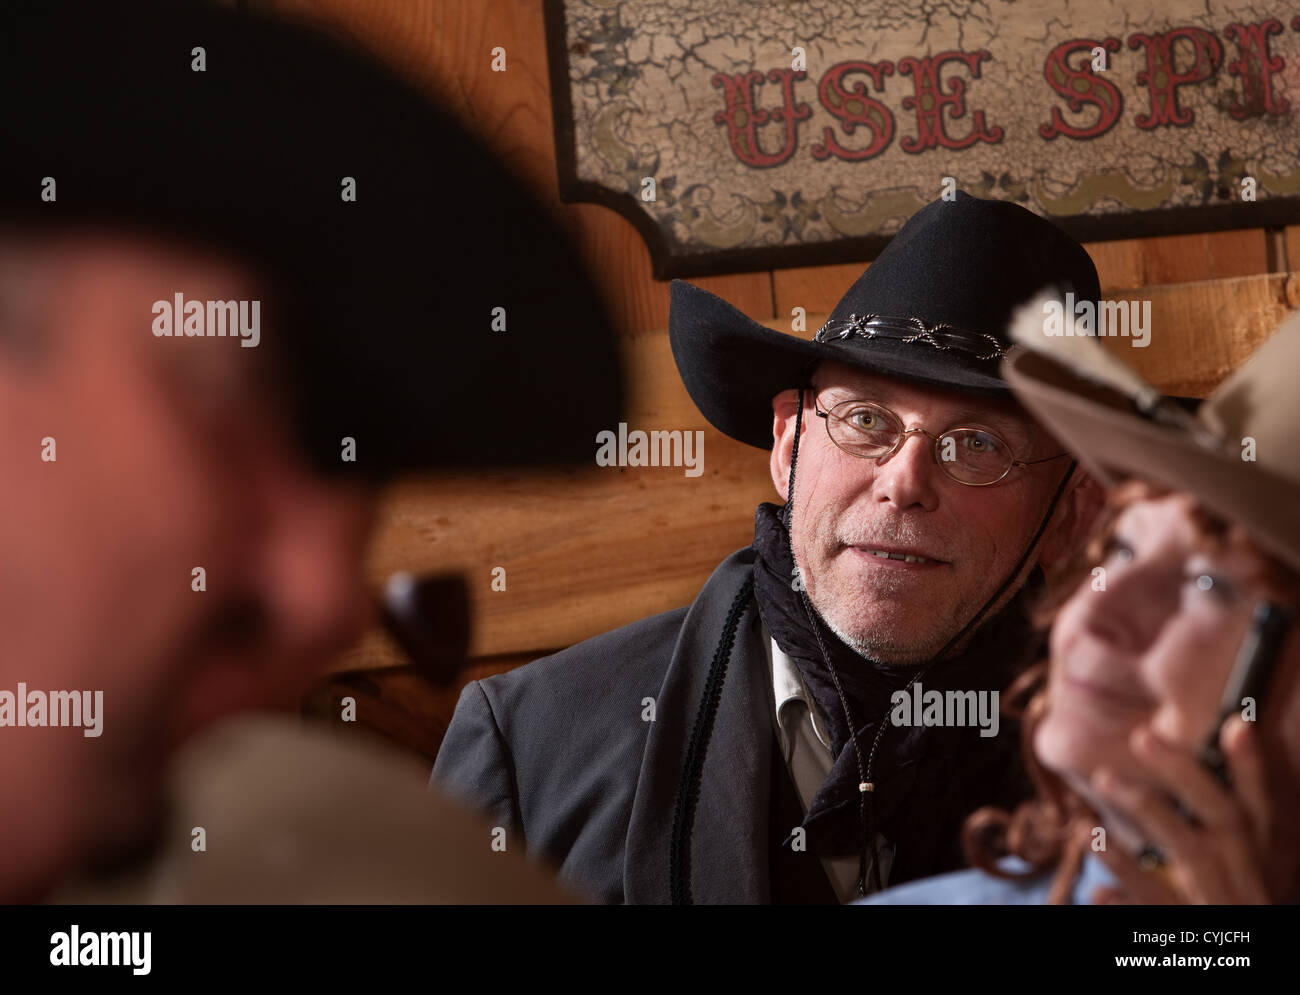 Grinning cowboy in crowded old American west saloon Stock Photo